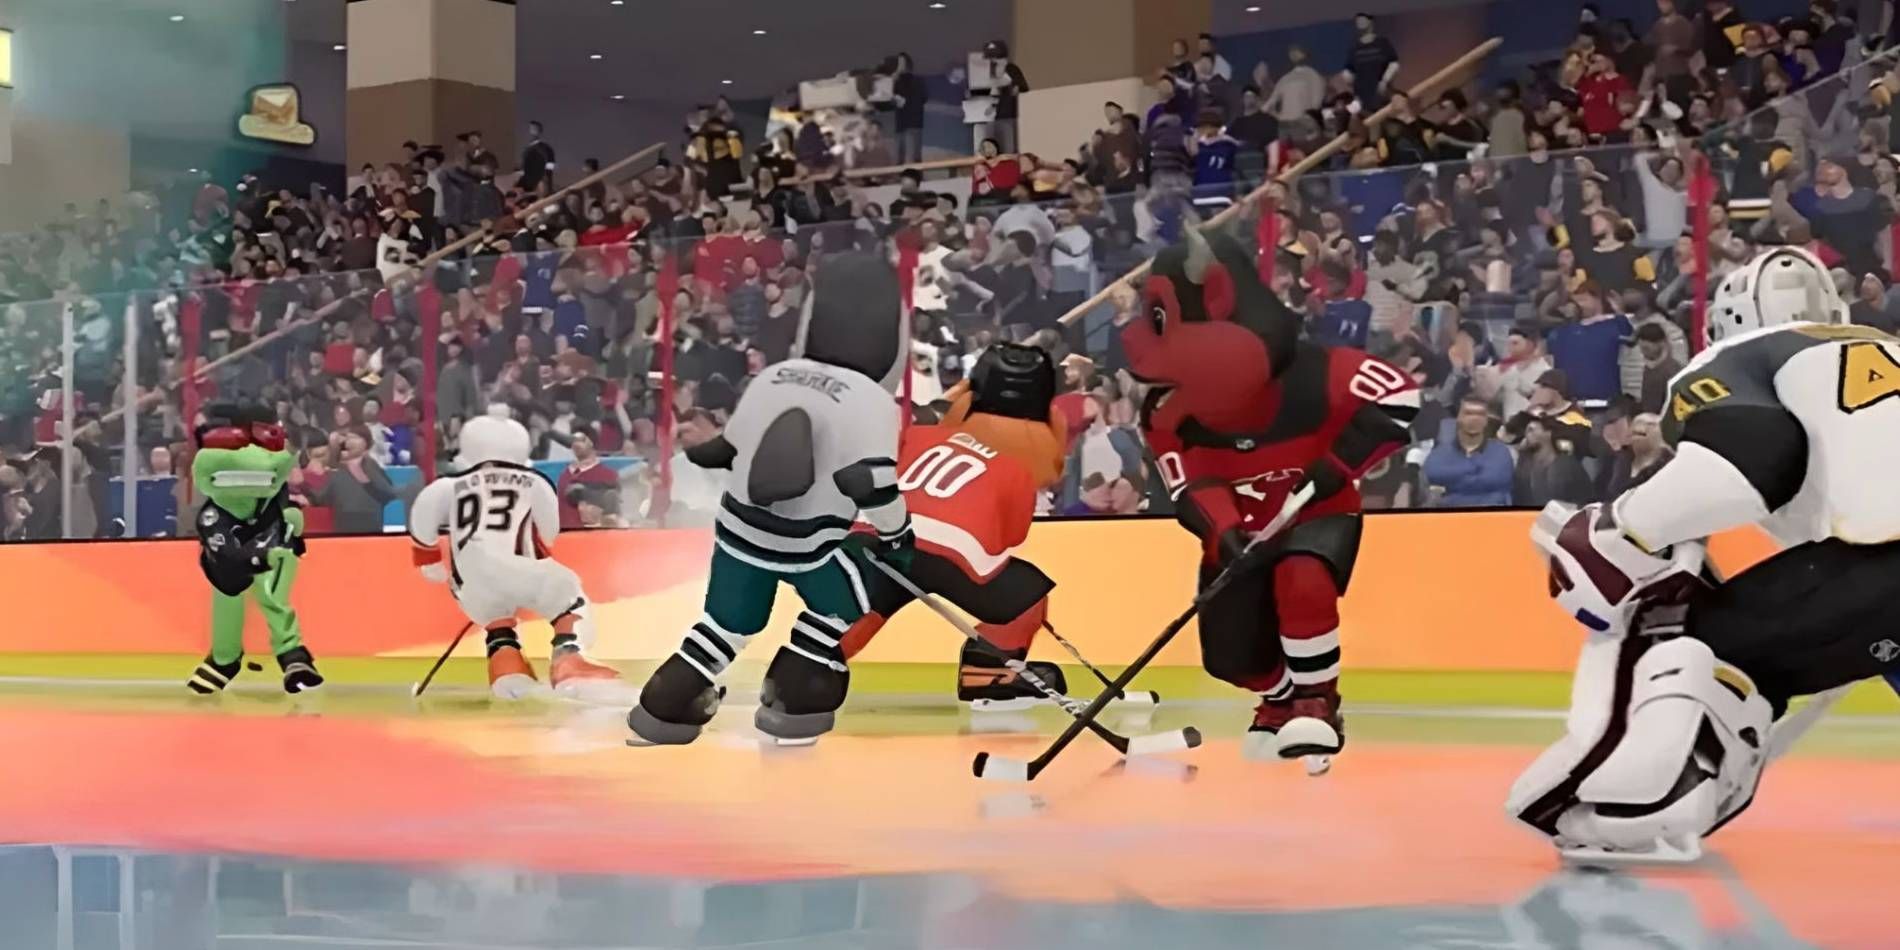 NHL 23 Mascots Devil, Frog, Shark, and Normal Goalie Playing Threes Mode on Orange, Yellow, and Green Rink